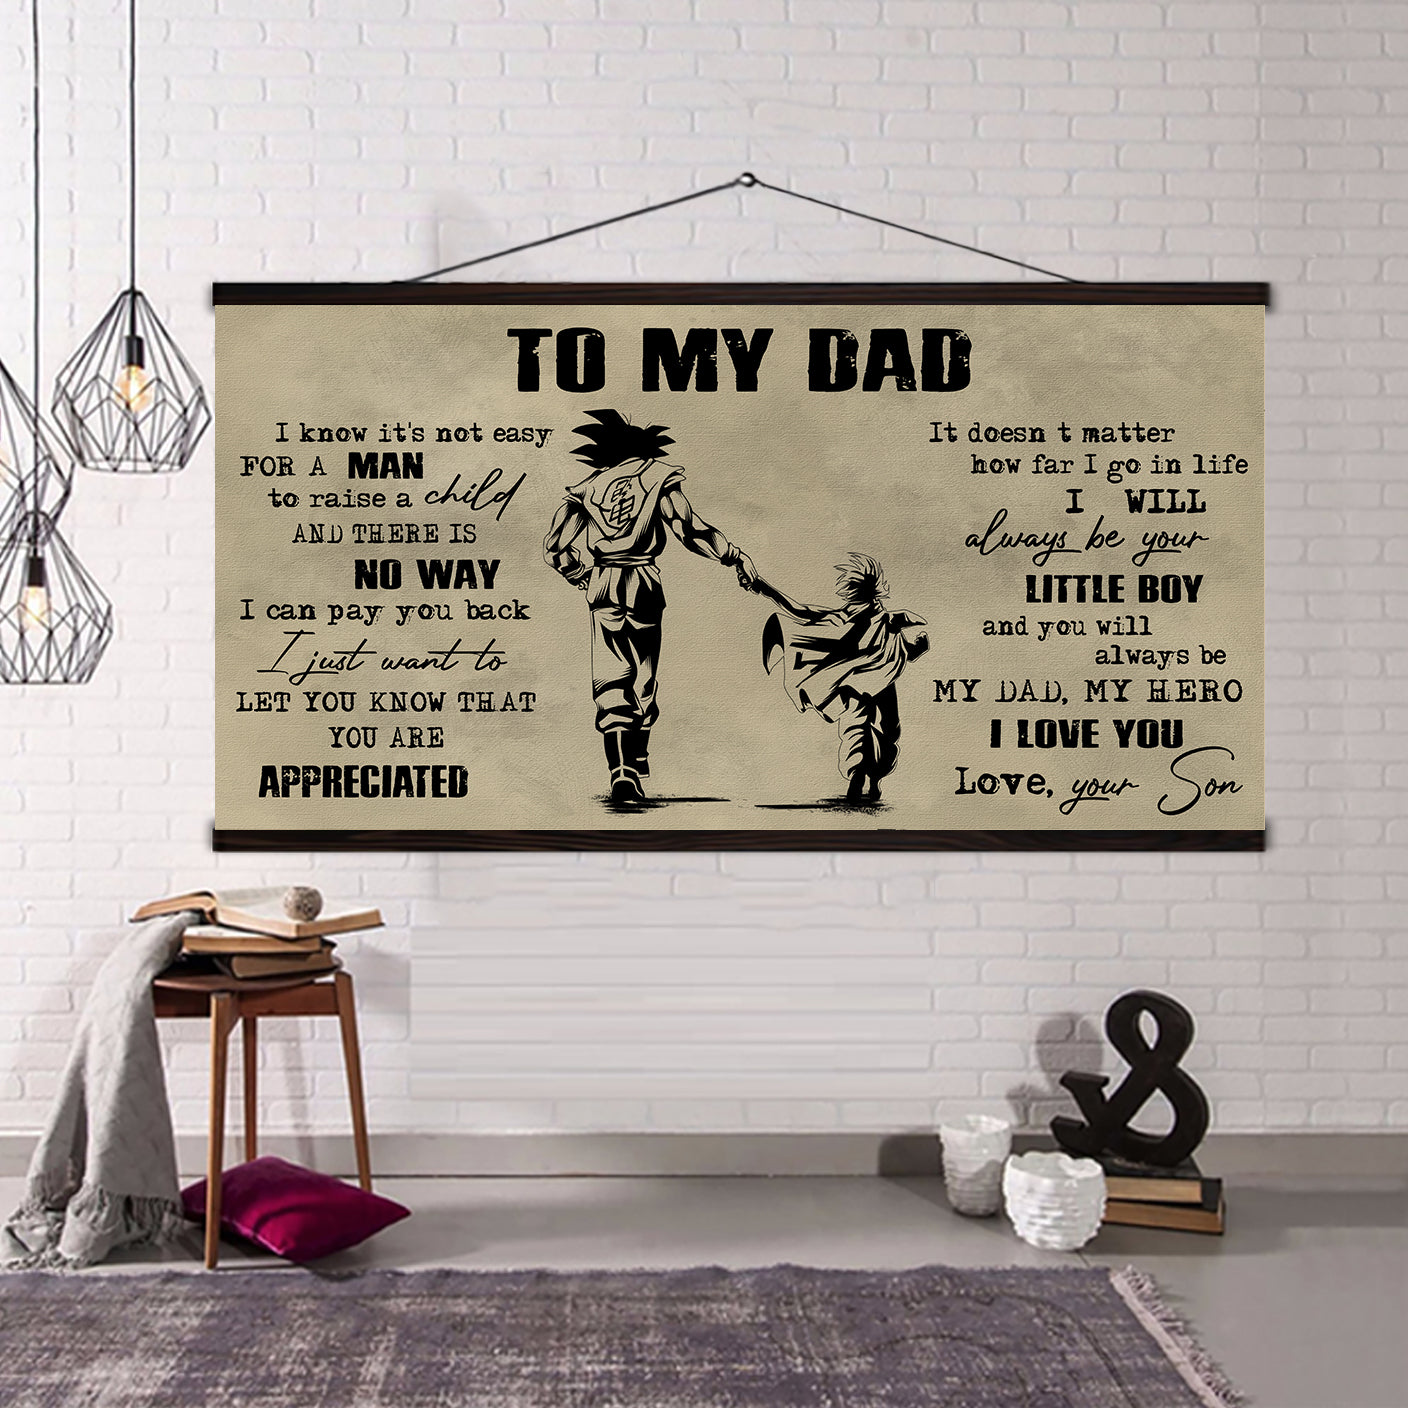 (CV29) TO MY DAD- SON - DRAGON BALL- SOLDIER-FAMILY -DAD SON- GOKU - VIKING - CANVAS POSTER